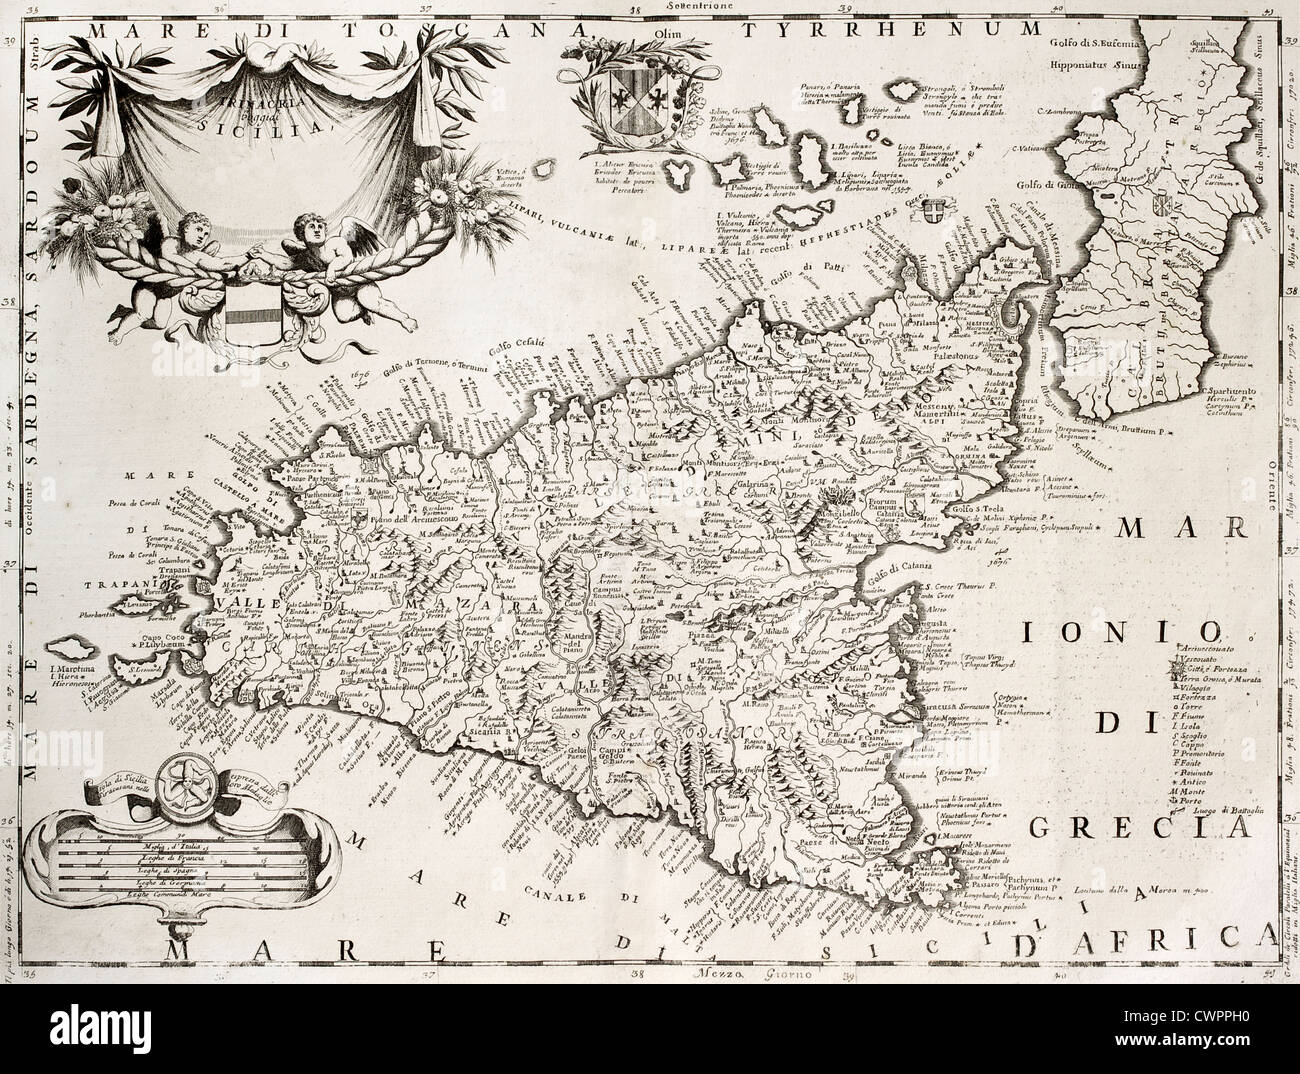 Old map of Sicily Stock Photo